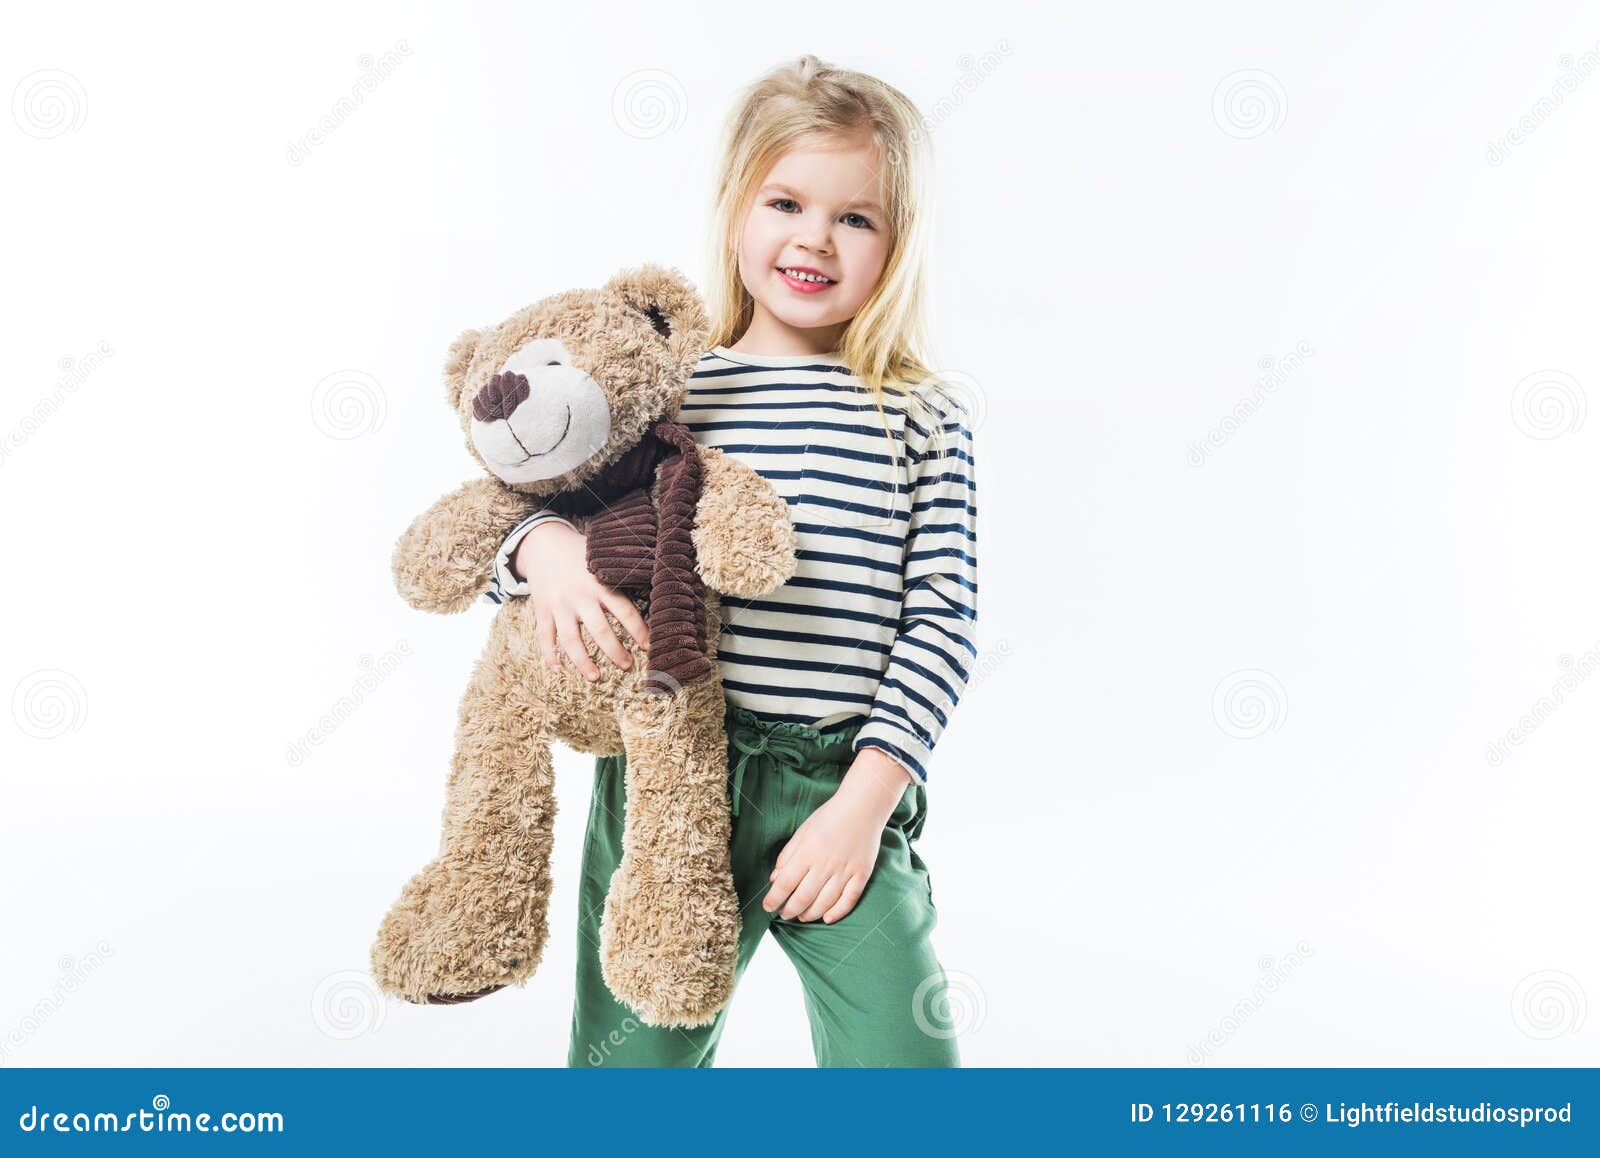 Adorable Little Child with Teddy Bear Stock Photo - Image of stylish ...